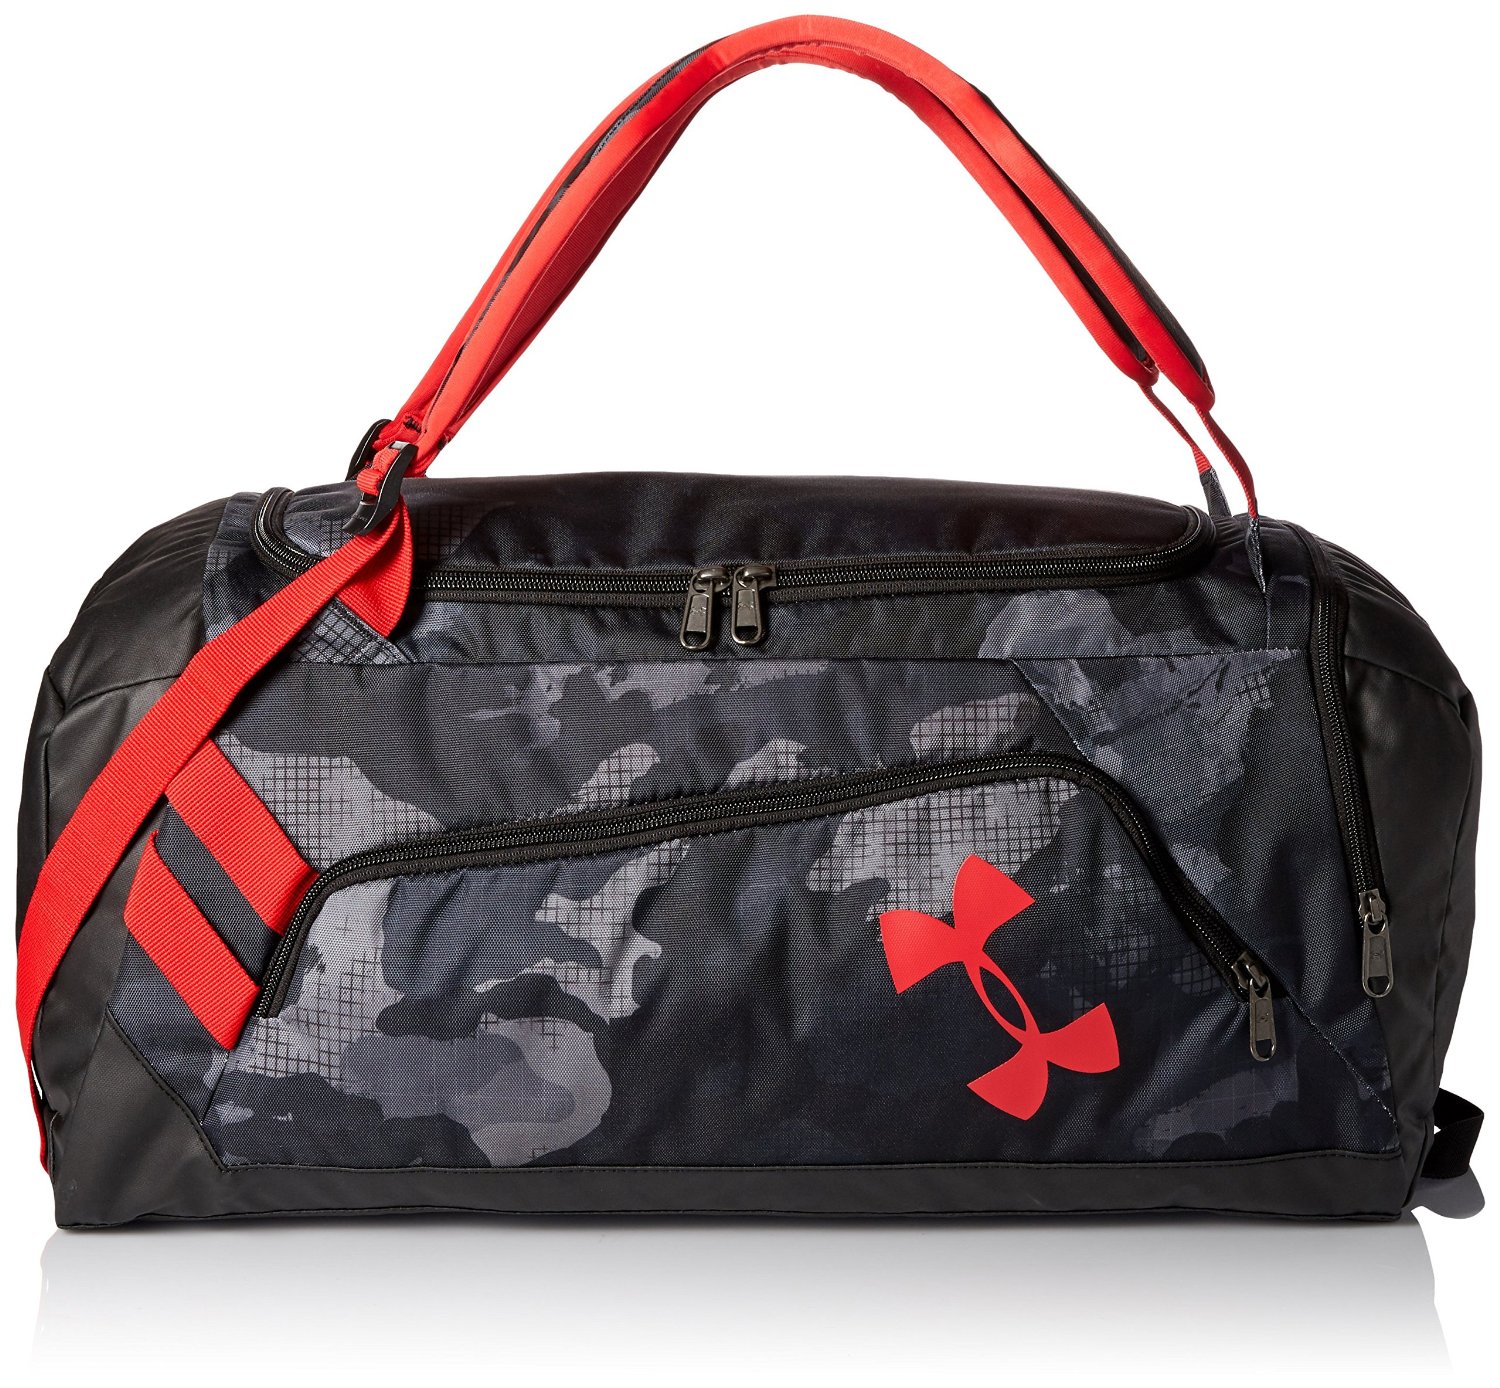 under armour gym backpack